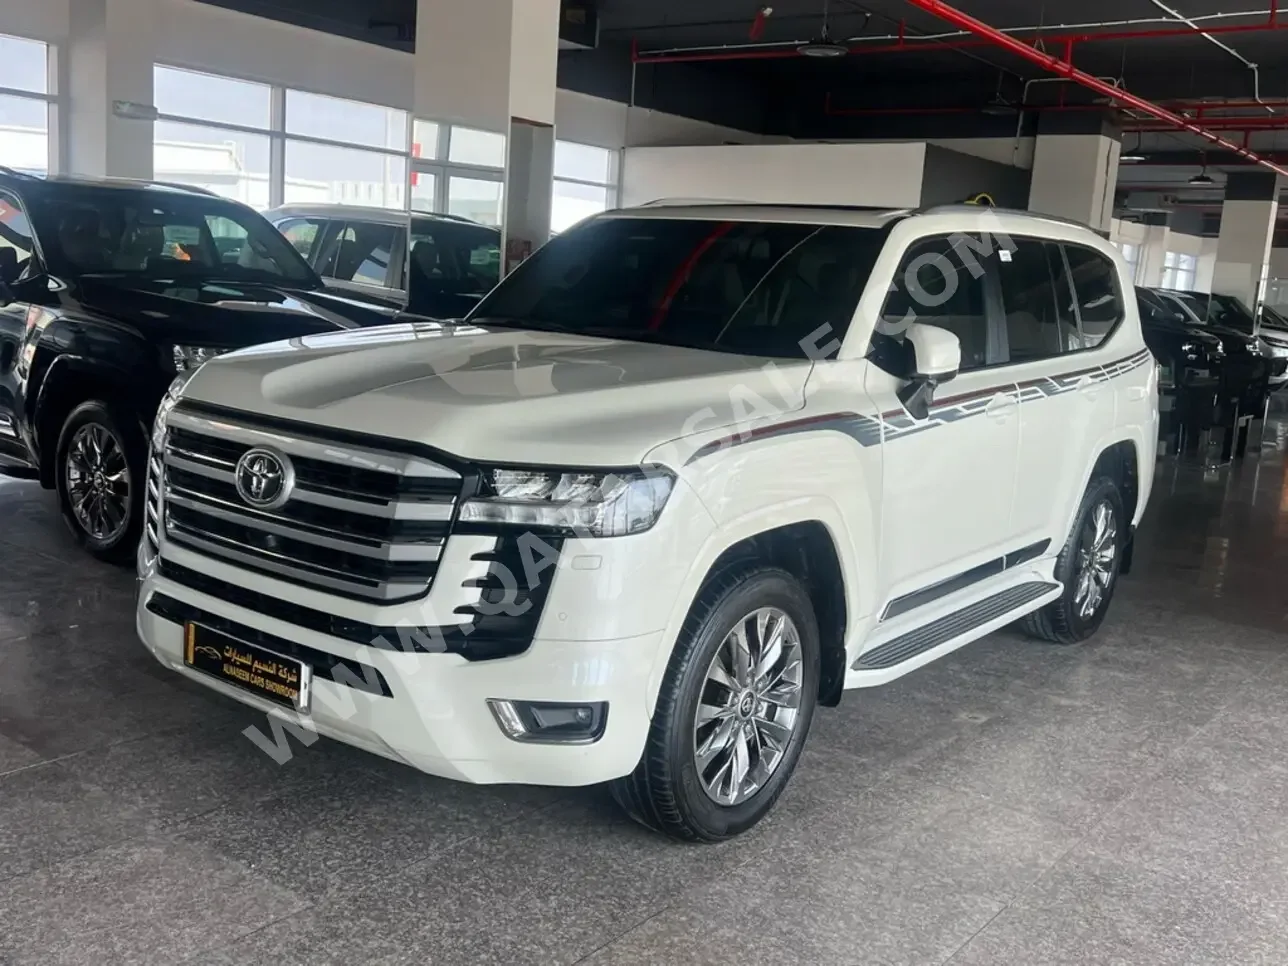 Toyota  Land Cruiser  GXR Twin Turbo  2023  Automatic  23,000 Km  6 Cylinder  Four Wheel Drive (4WD)  SUV  White  With Warranty